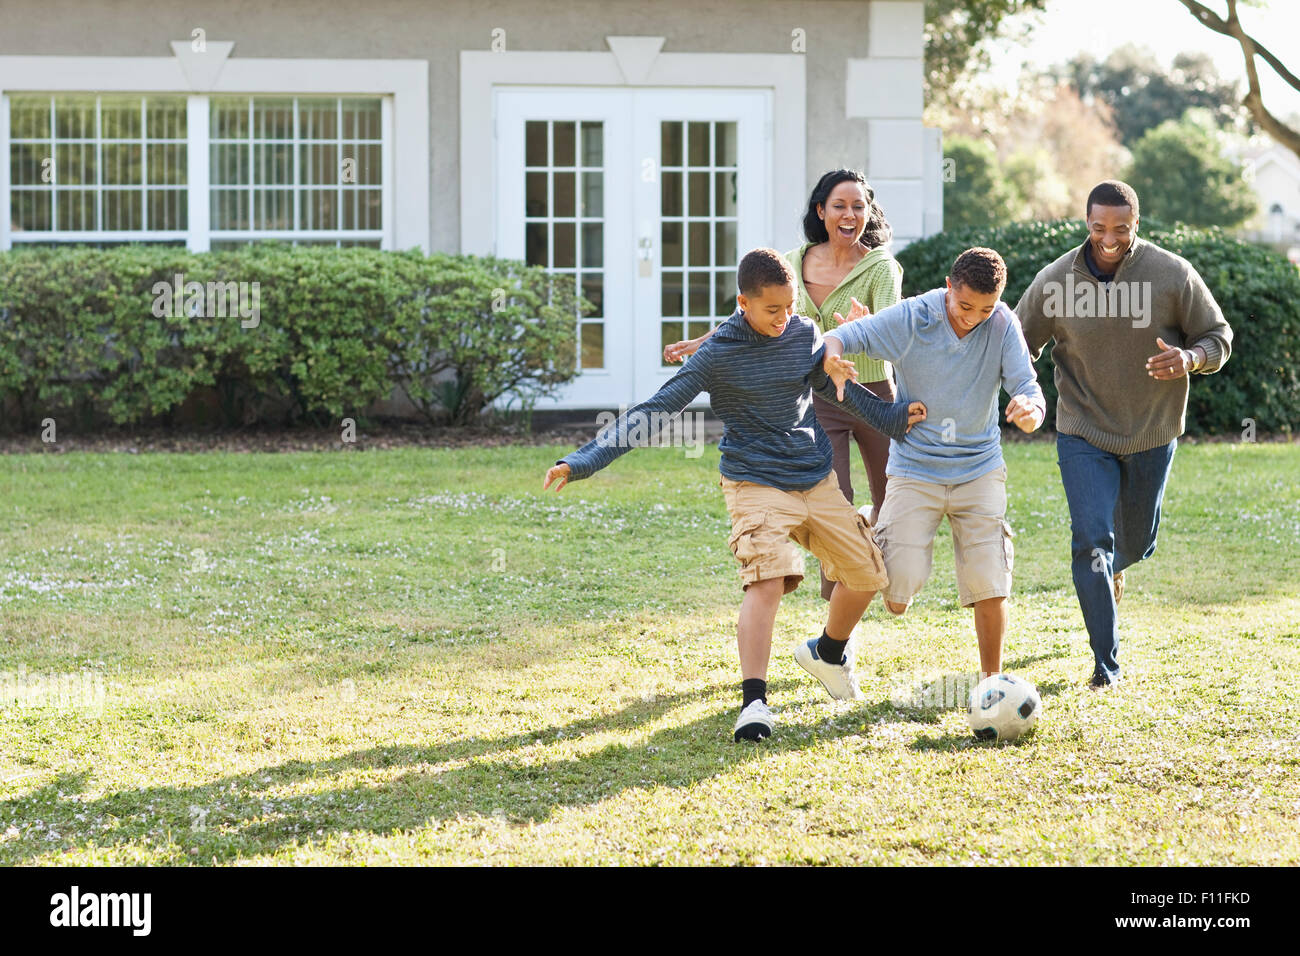 Family playing soccer in backyard Stock Photo